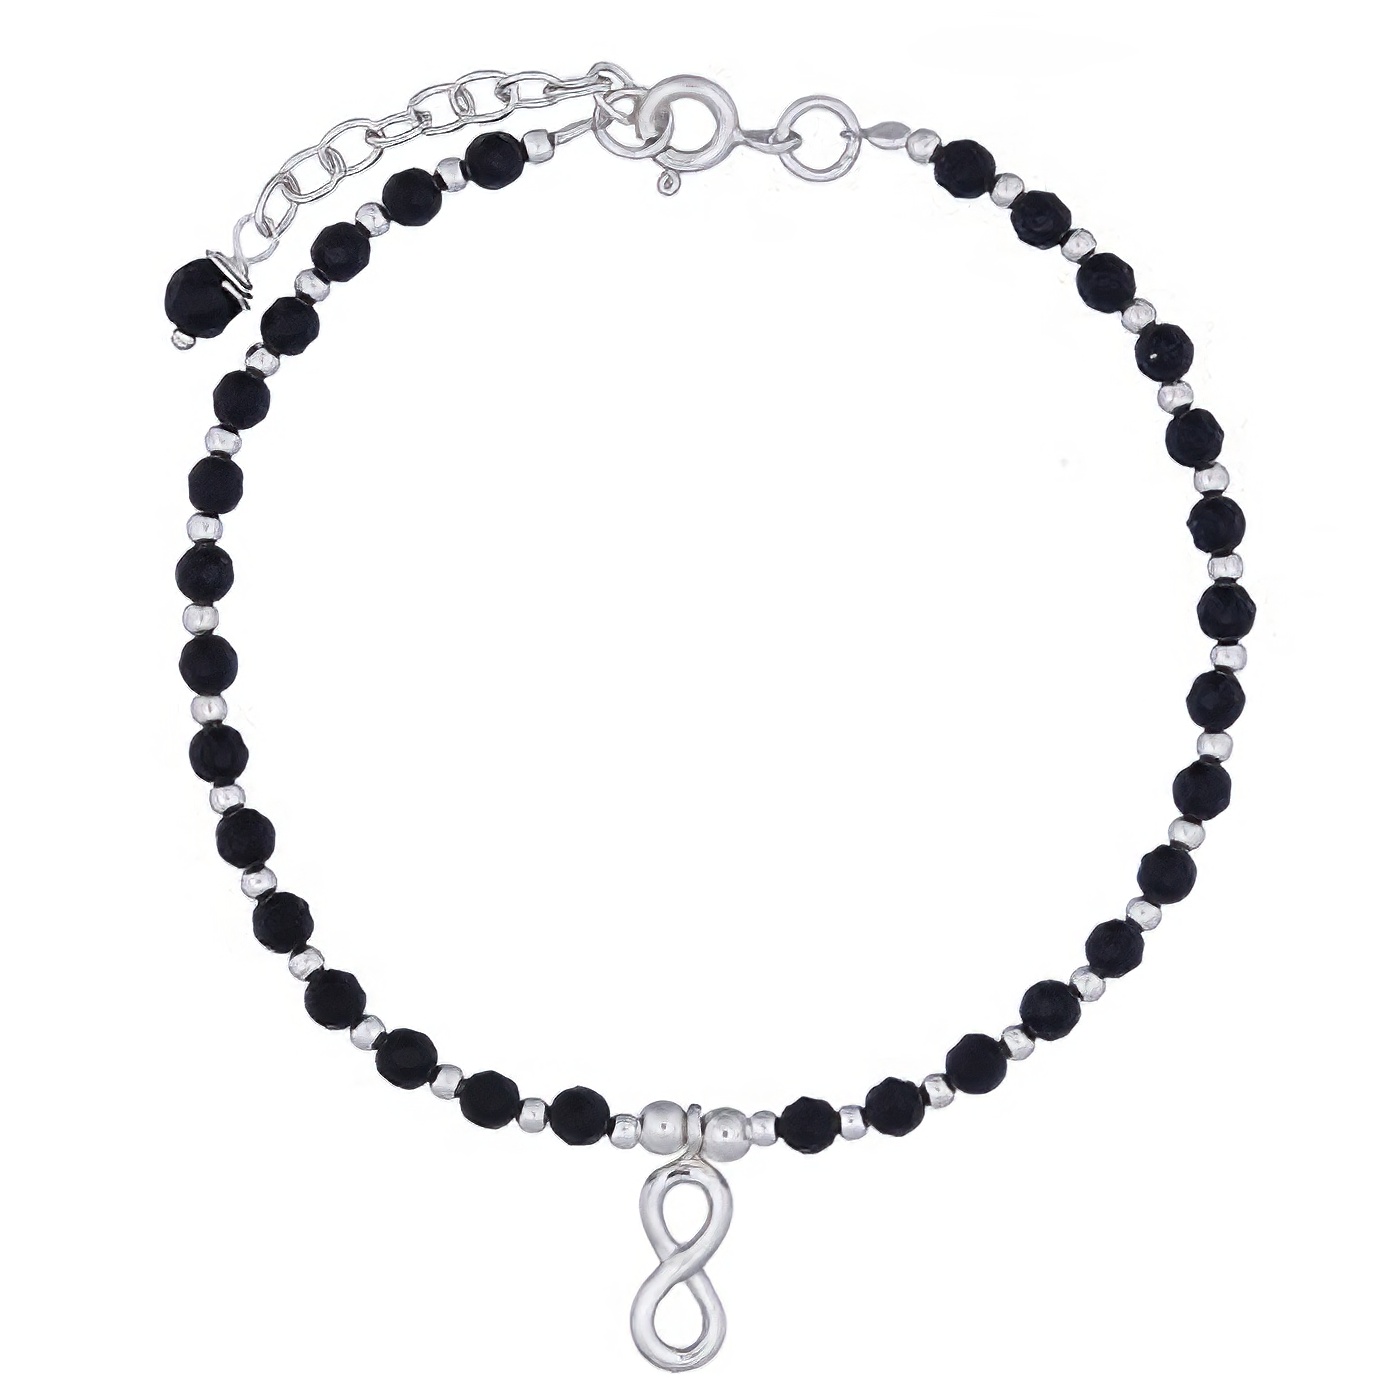 Infinity Bracelet Faceted Black Agate and Round Silver Beads 